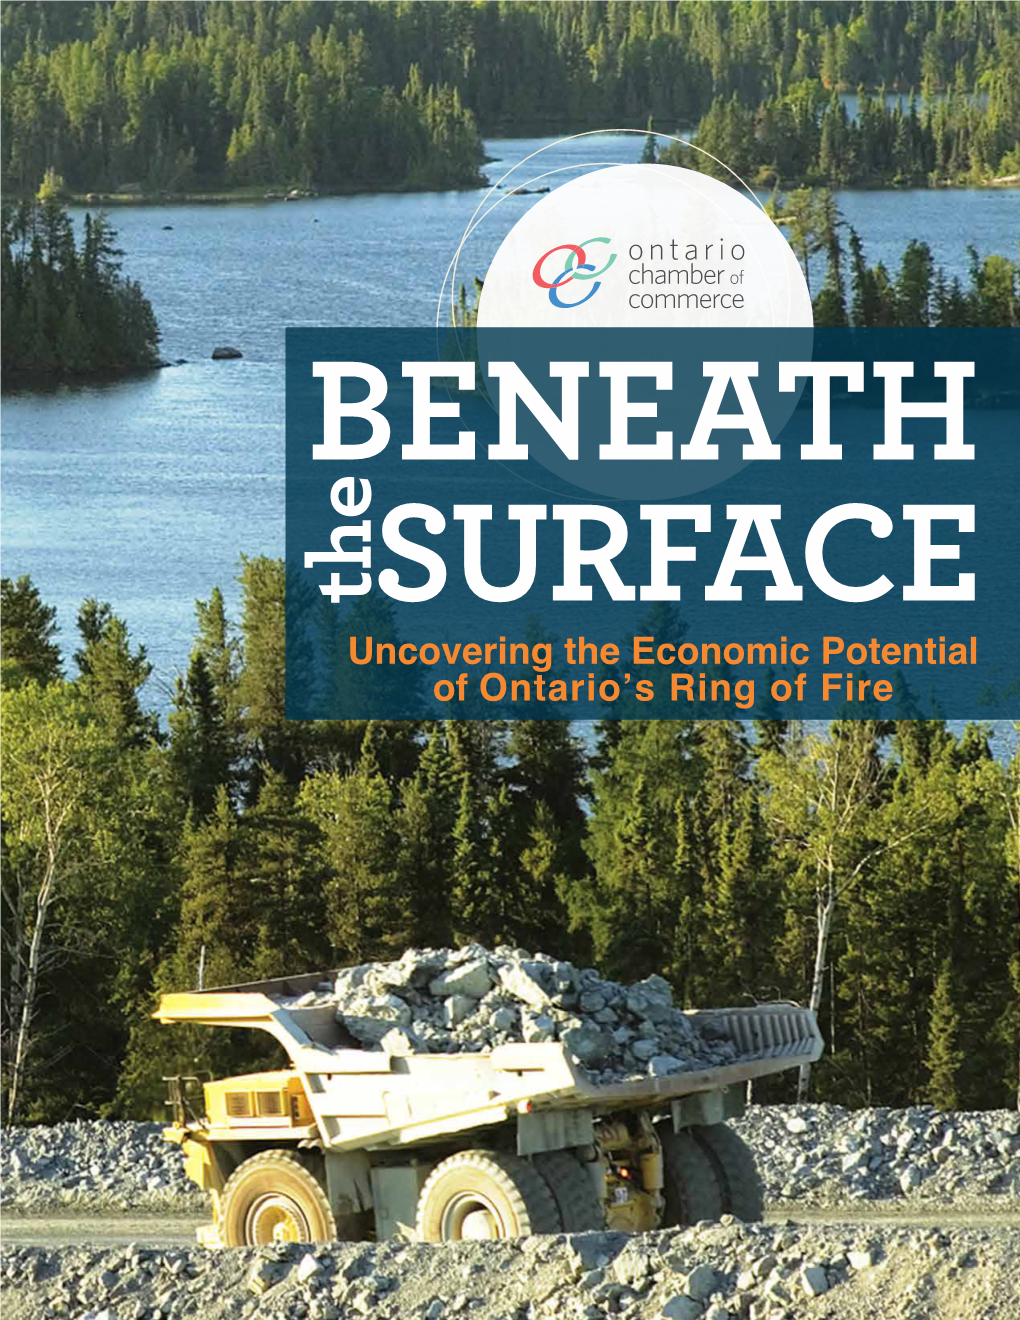 Beneath the Surface: Uncovering the Economic Potential of Ontario's Ring of Fire